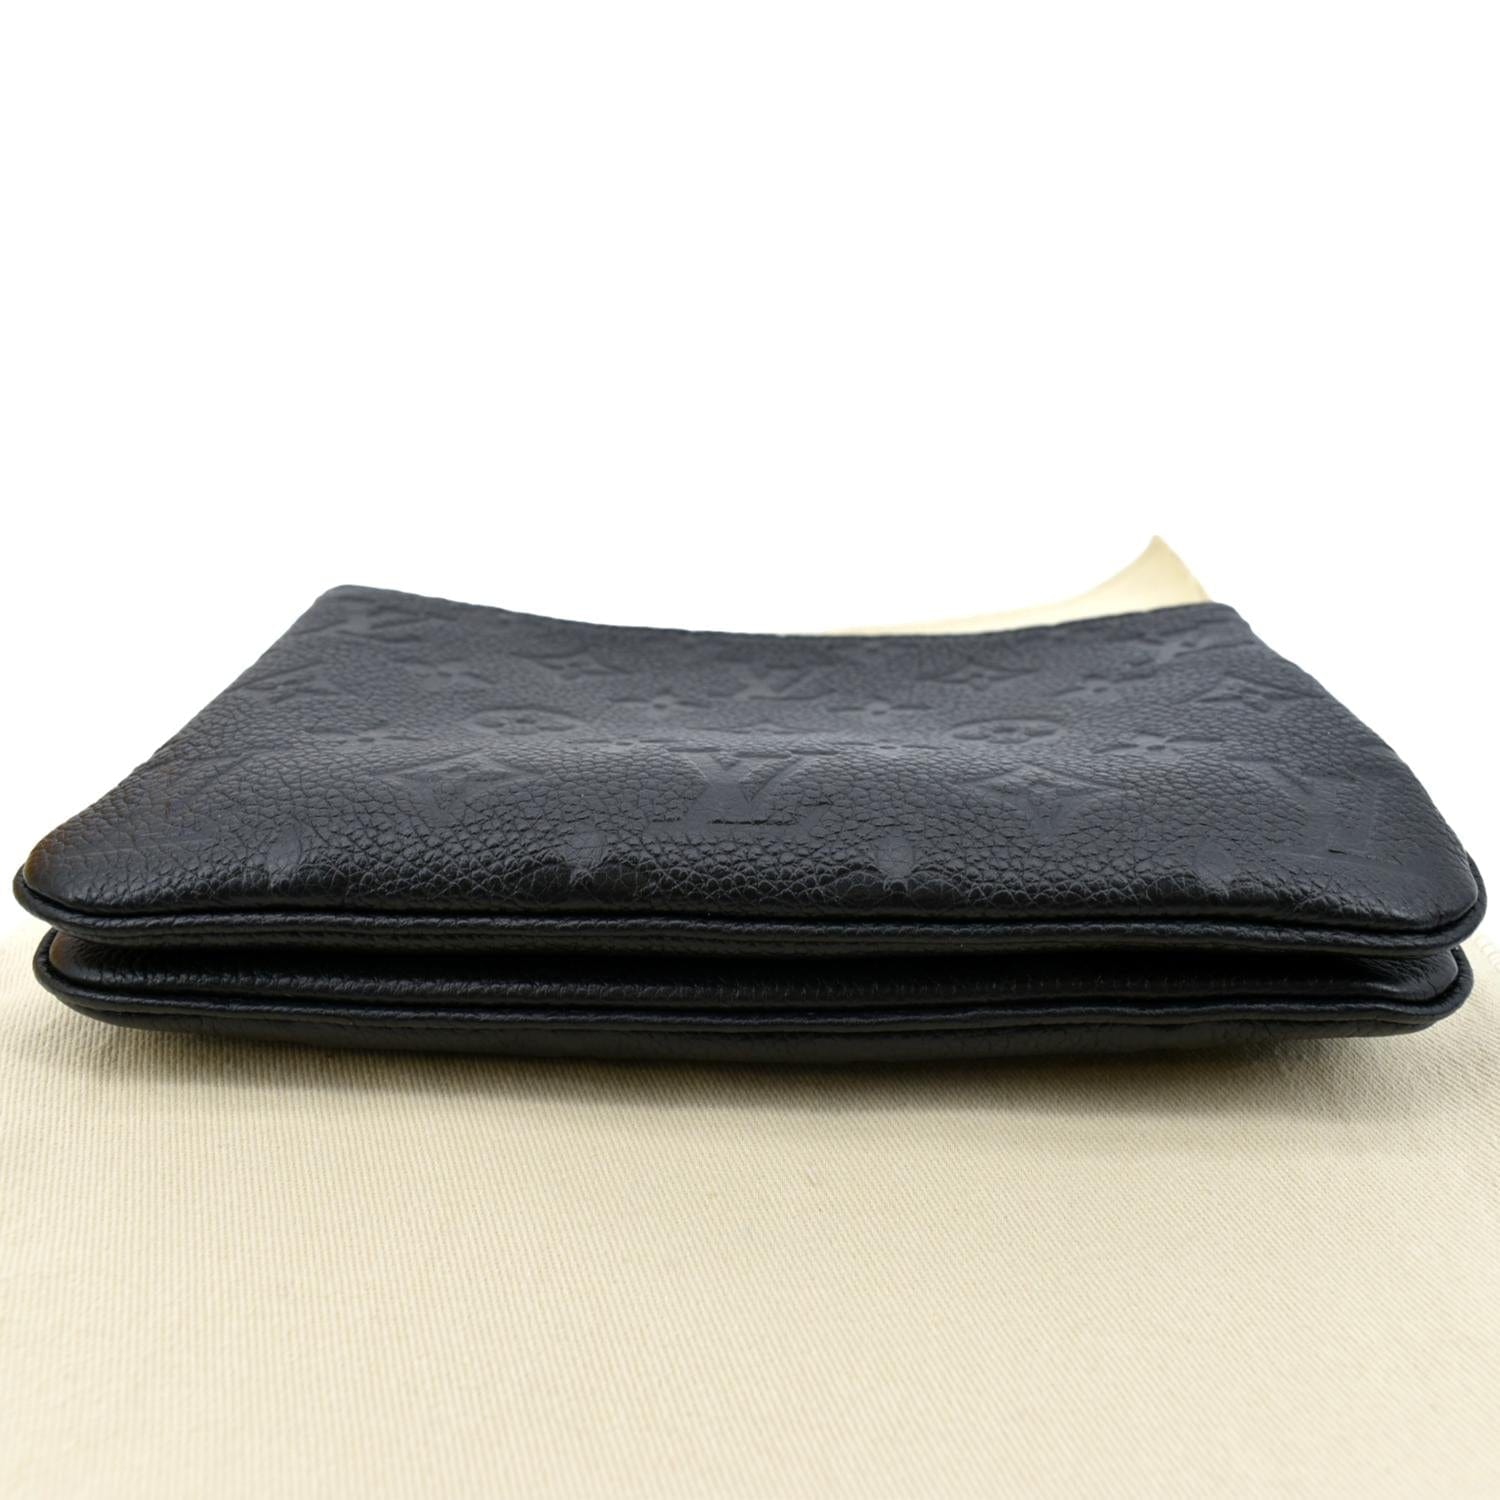 Double Zip Pochette Monogram Empreinte Leather - Wallets and Small Leather  Goods